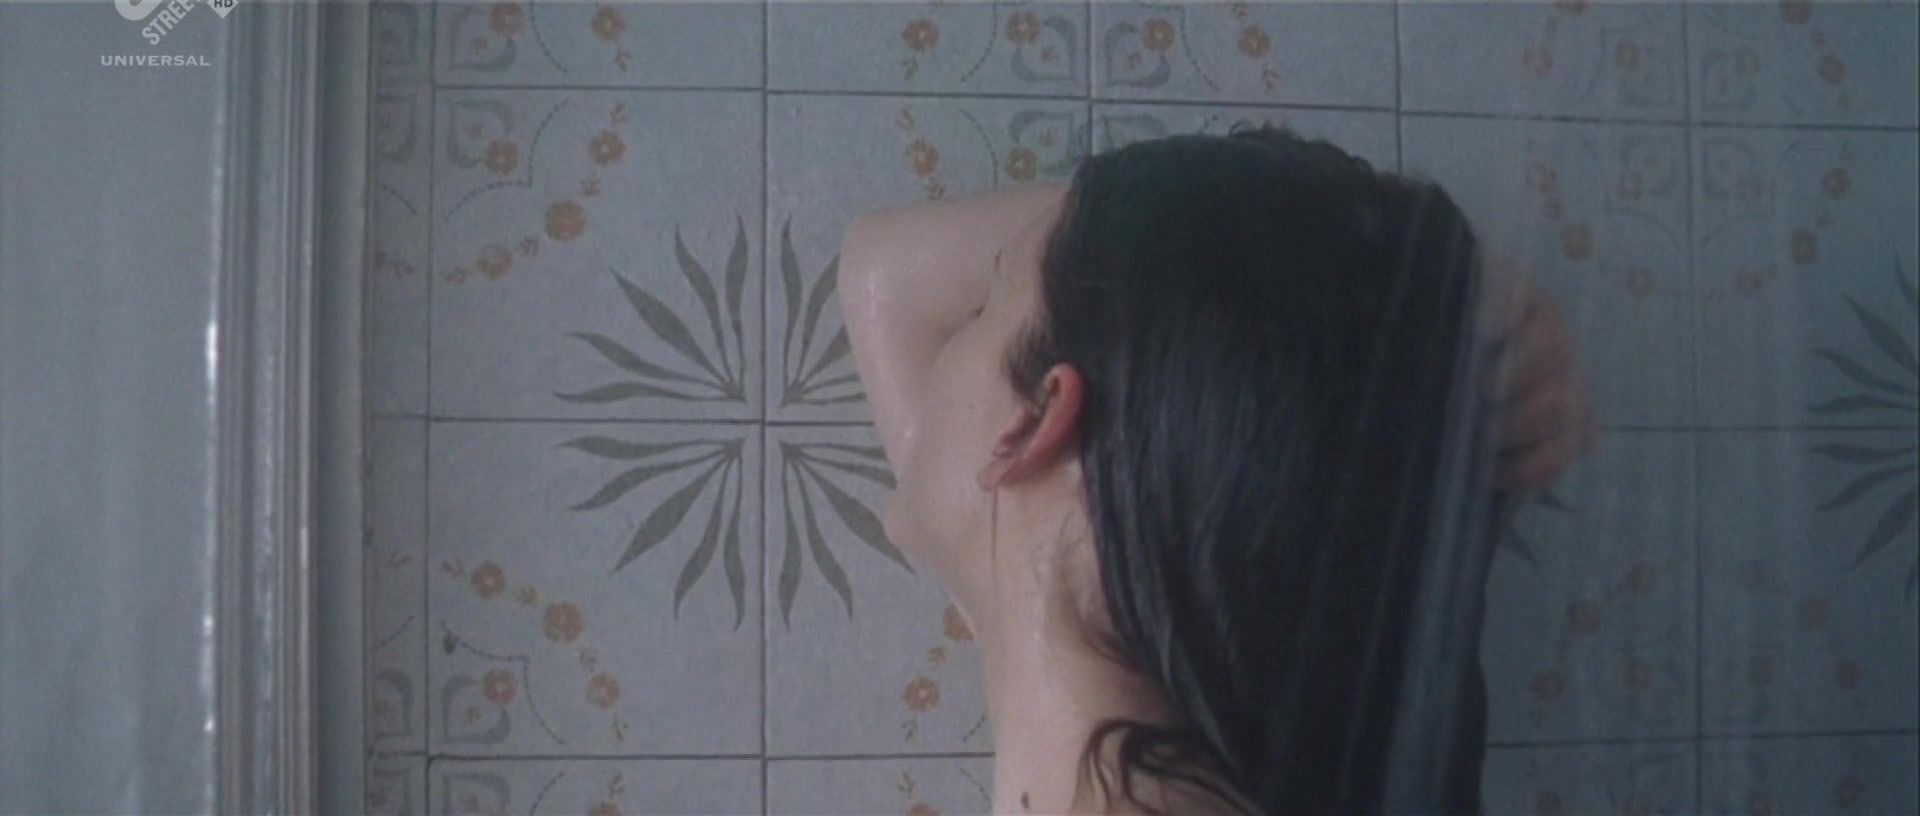 Hot Couple Sex Topless Melanie Laurent from Shower Video of the French movie "La chambre des morts" Brunet - 1